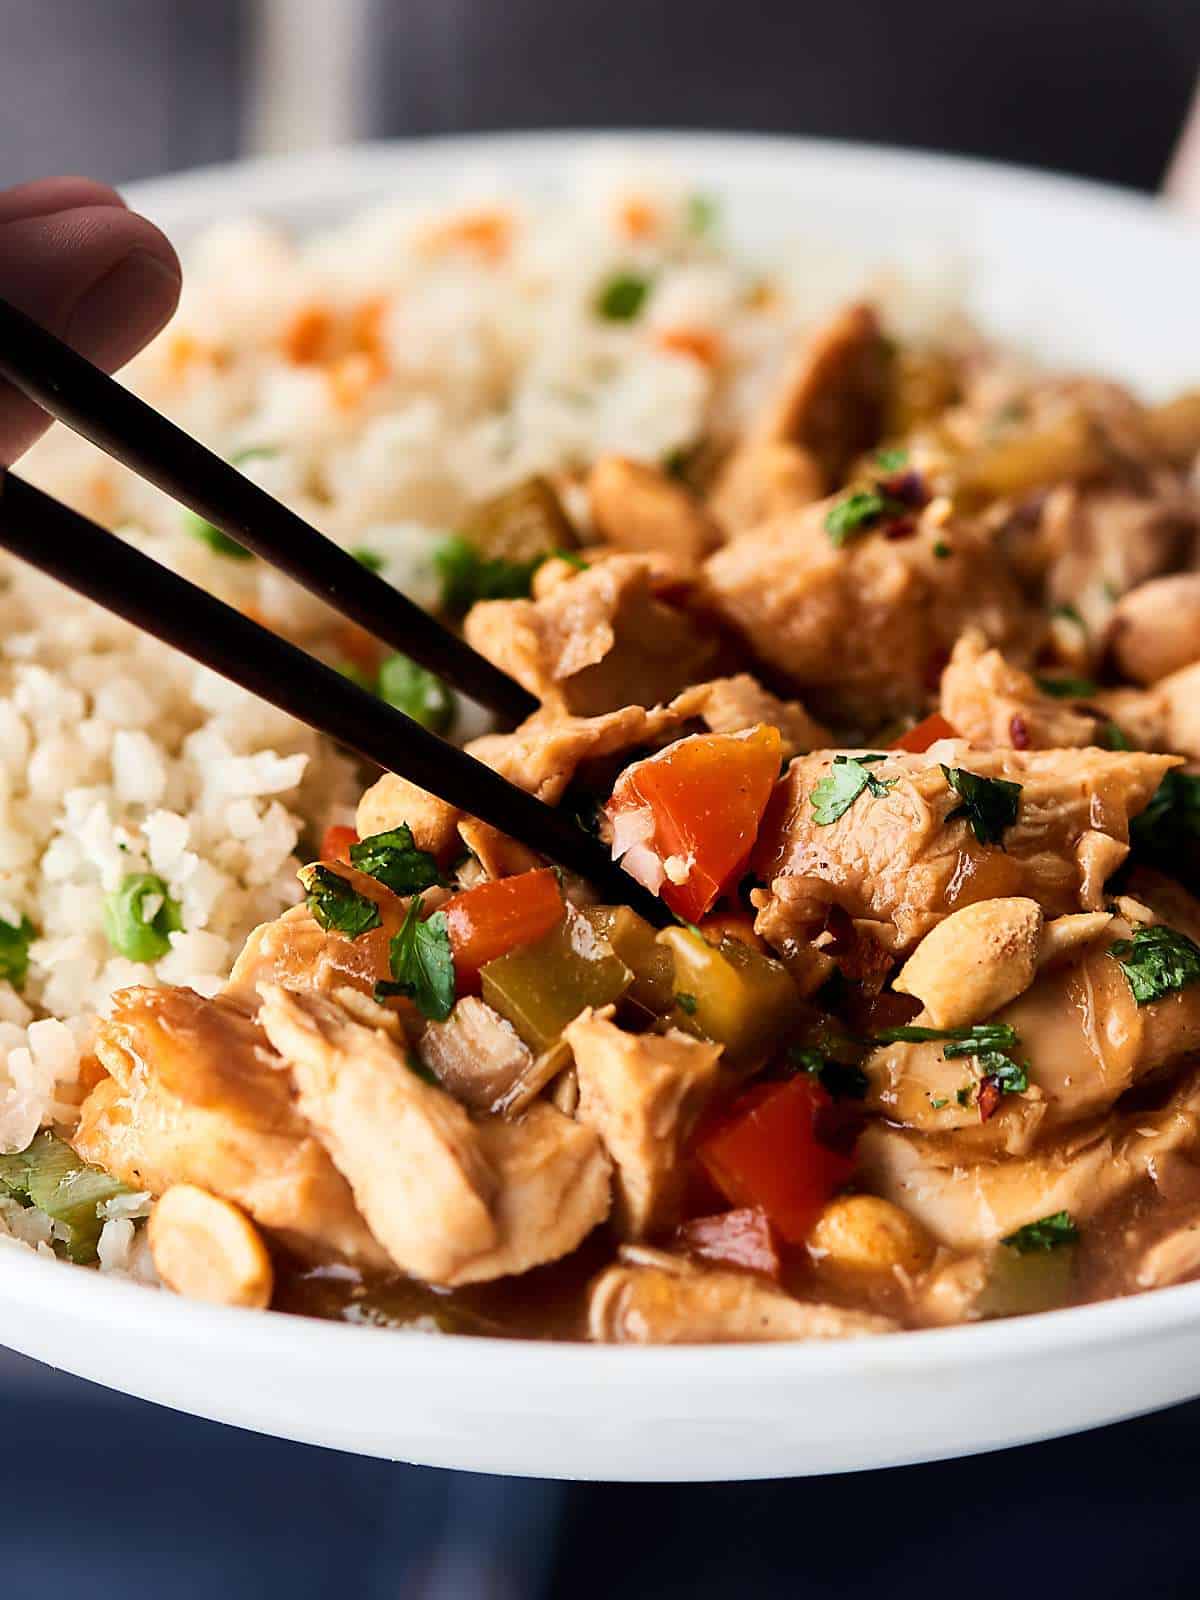 Slow Cooker Kung Pao Chicken Recipe - Easy & Healthy - 15-Minute Prep!